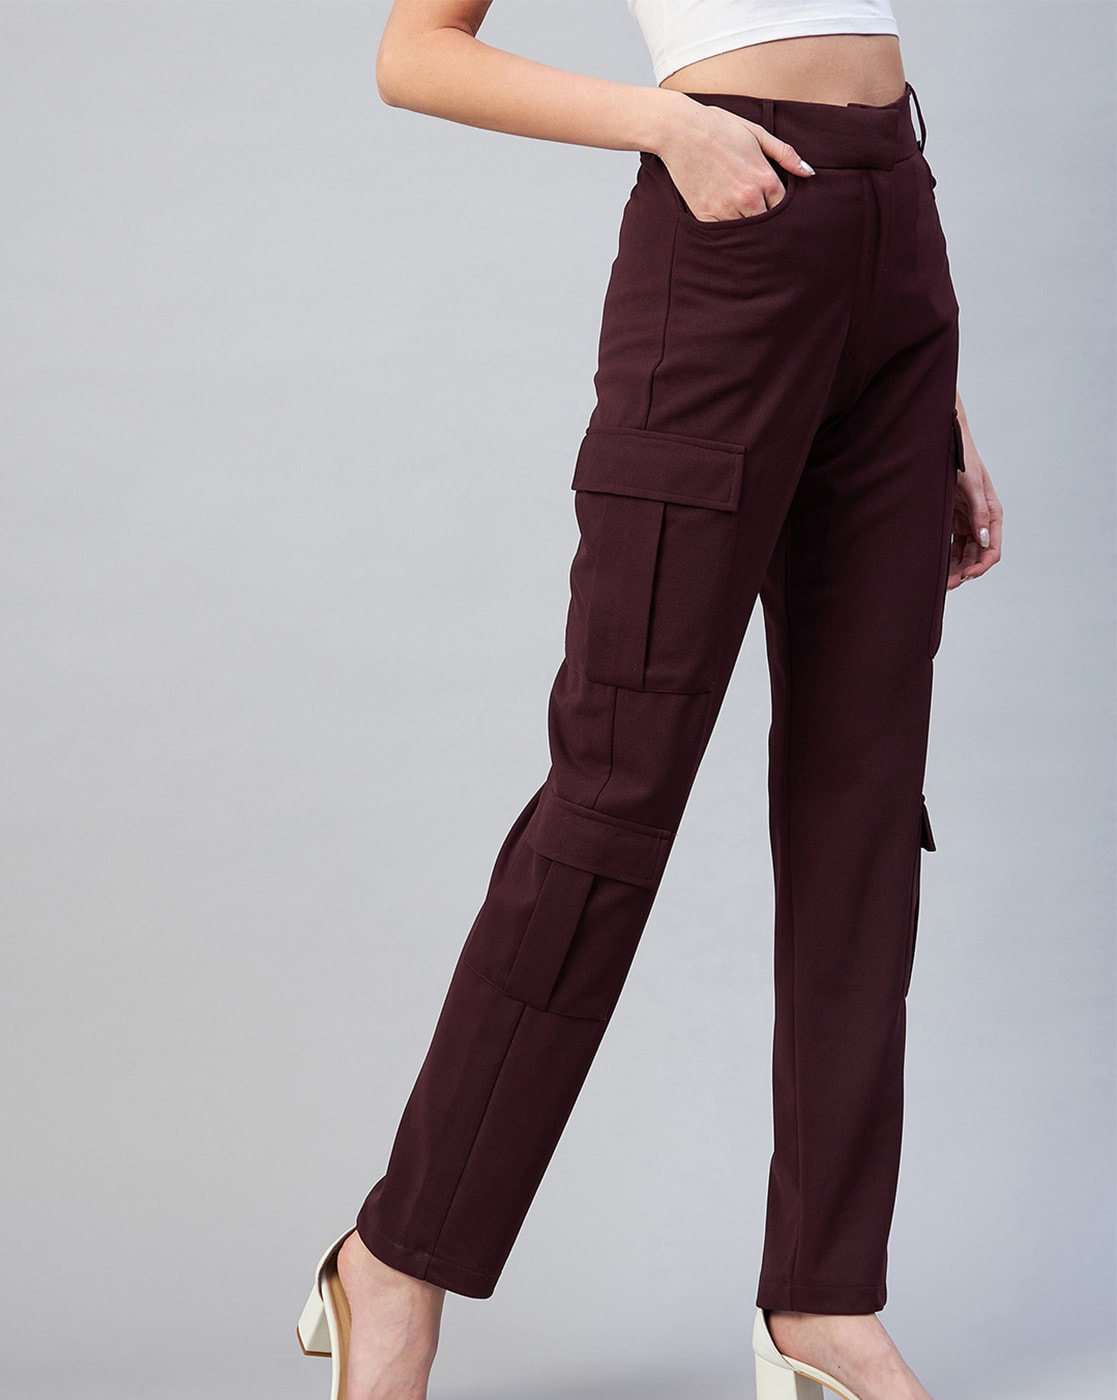 Lot Detail - Elvis Presley Owned and Worn Wine Colored Pants